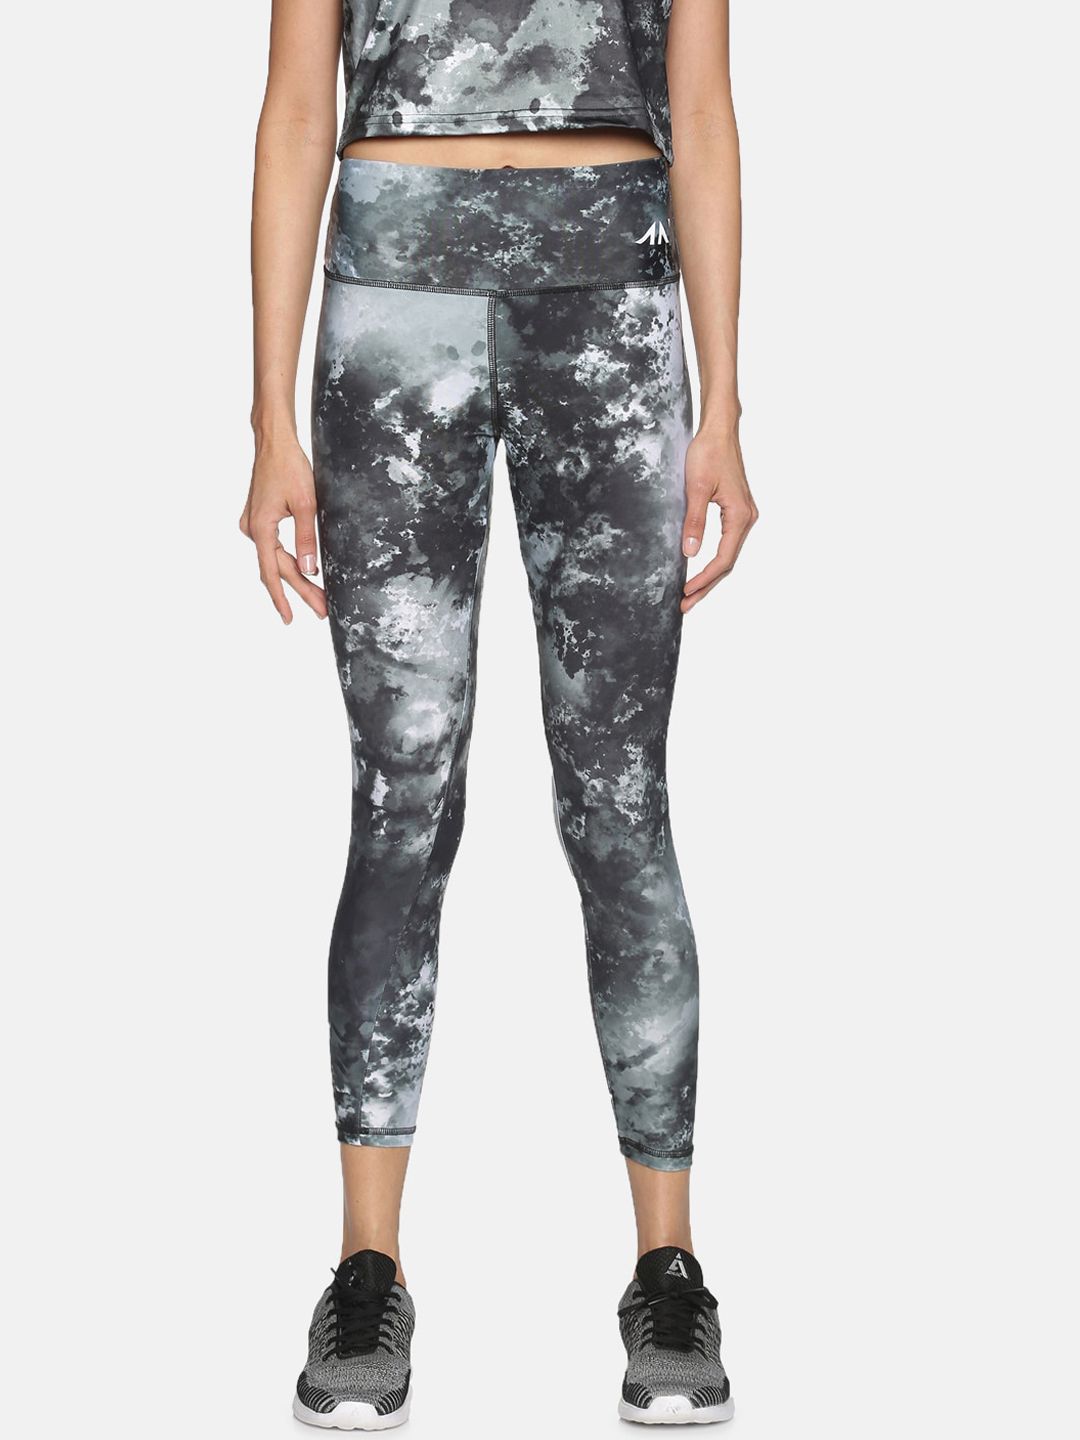 AESTHETIC NATION Women Black Printed Tie-Dye Effect Training Tights Price in India